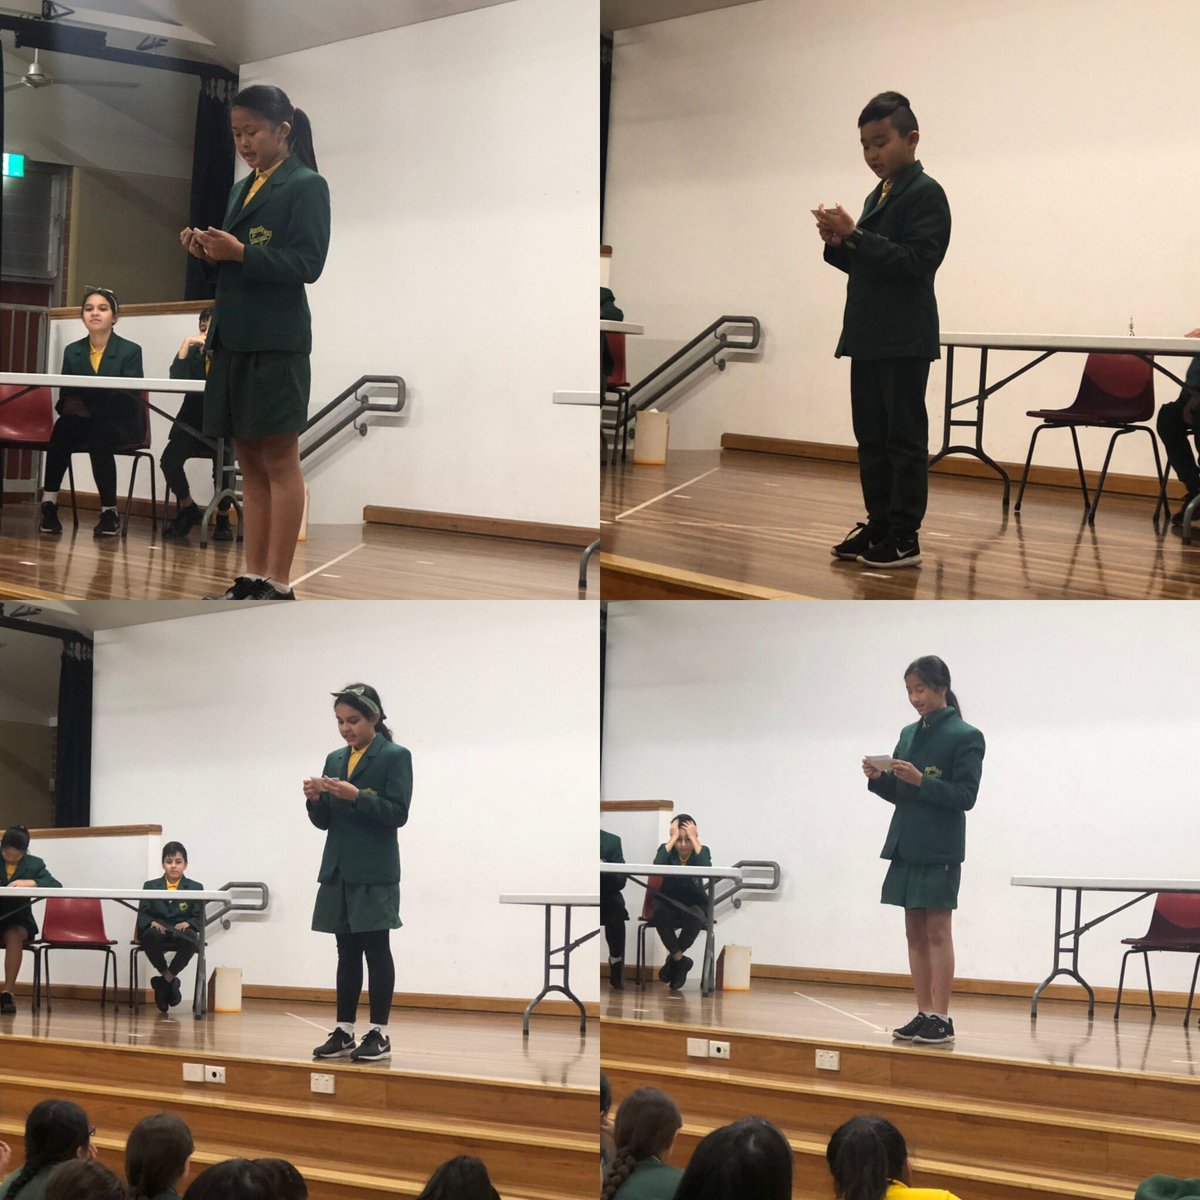 @FairWestPS debaters has their last debate on Thursday! We have seen so much growth in these students and we are so proud of their efforts this year 👏🏻 thank you @Genelle029 for again allowing our students to have this opportunity. @LilyThai9 @ShaunaghCompton @LongPha26820710